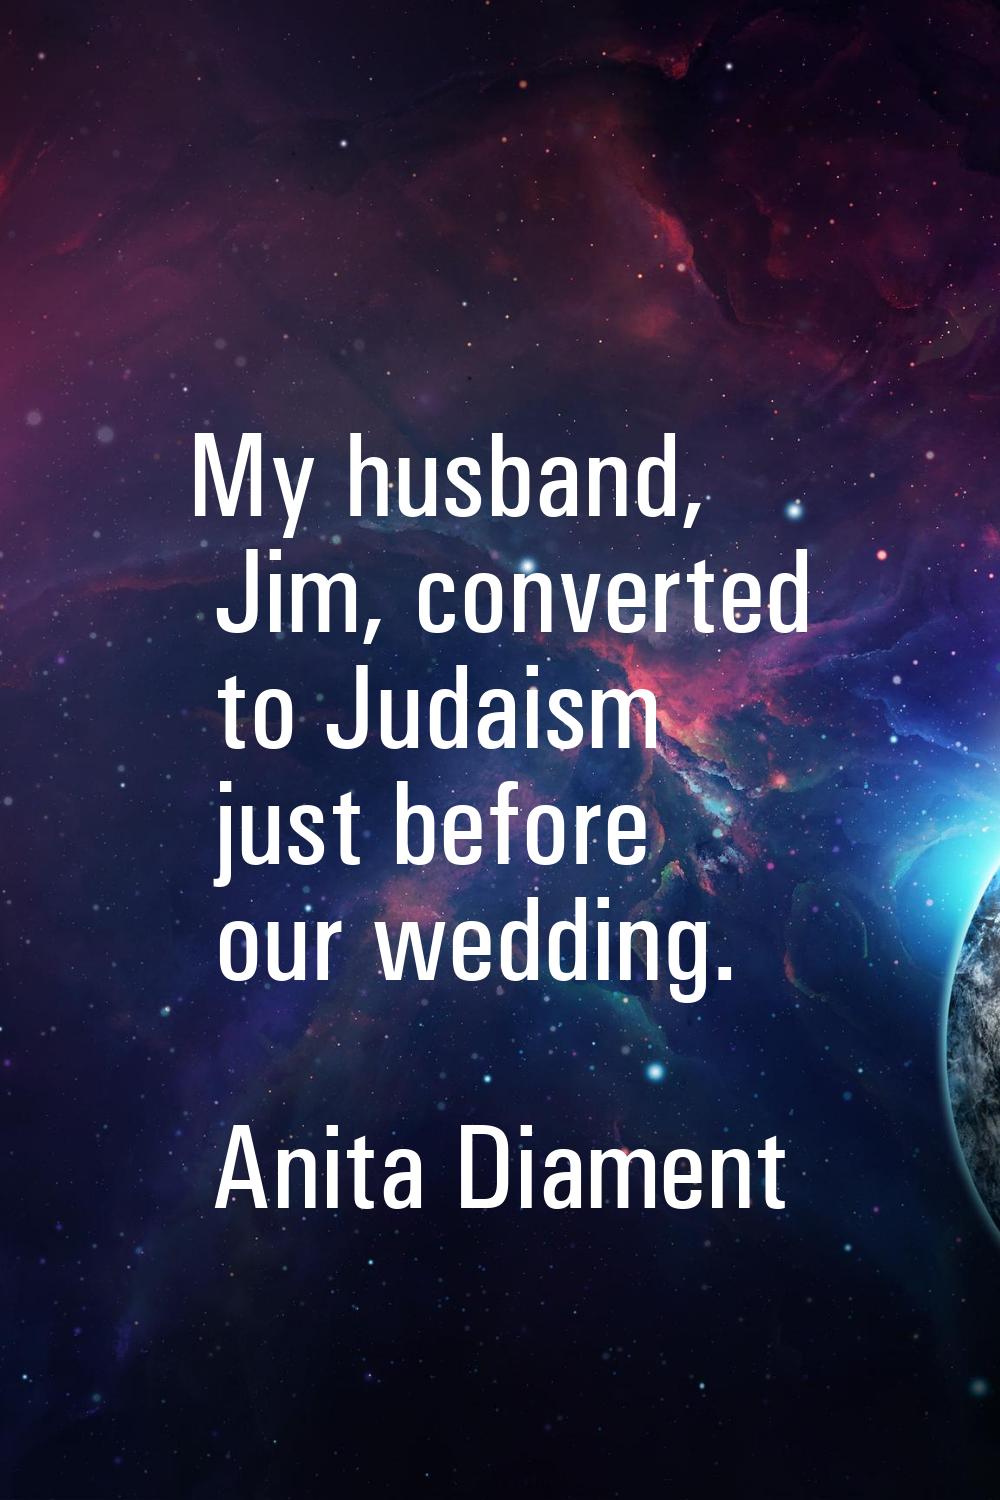 My husband, Jim, converted to Judaism just before our wedding.